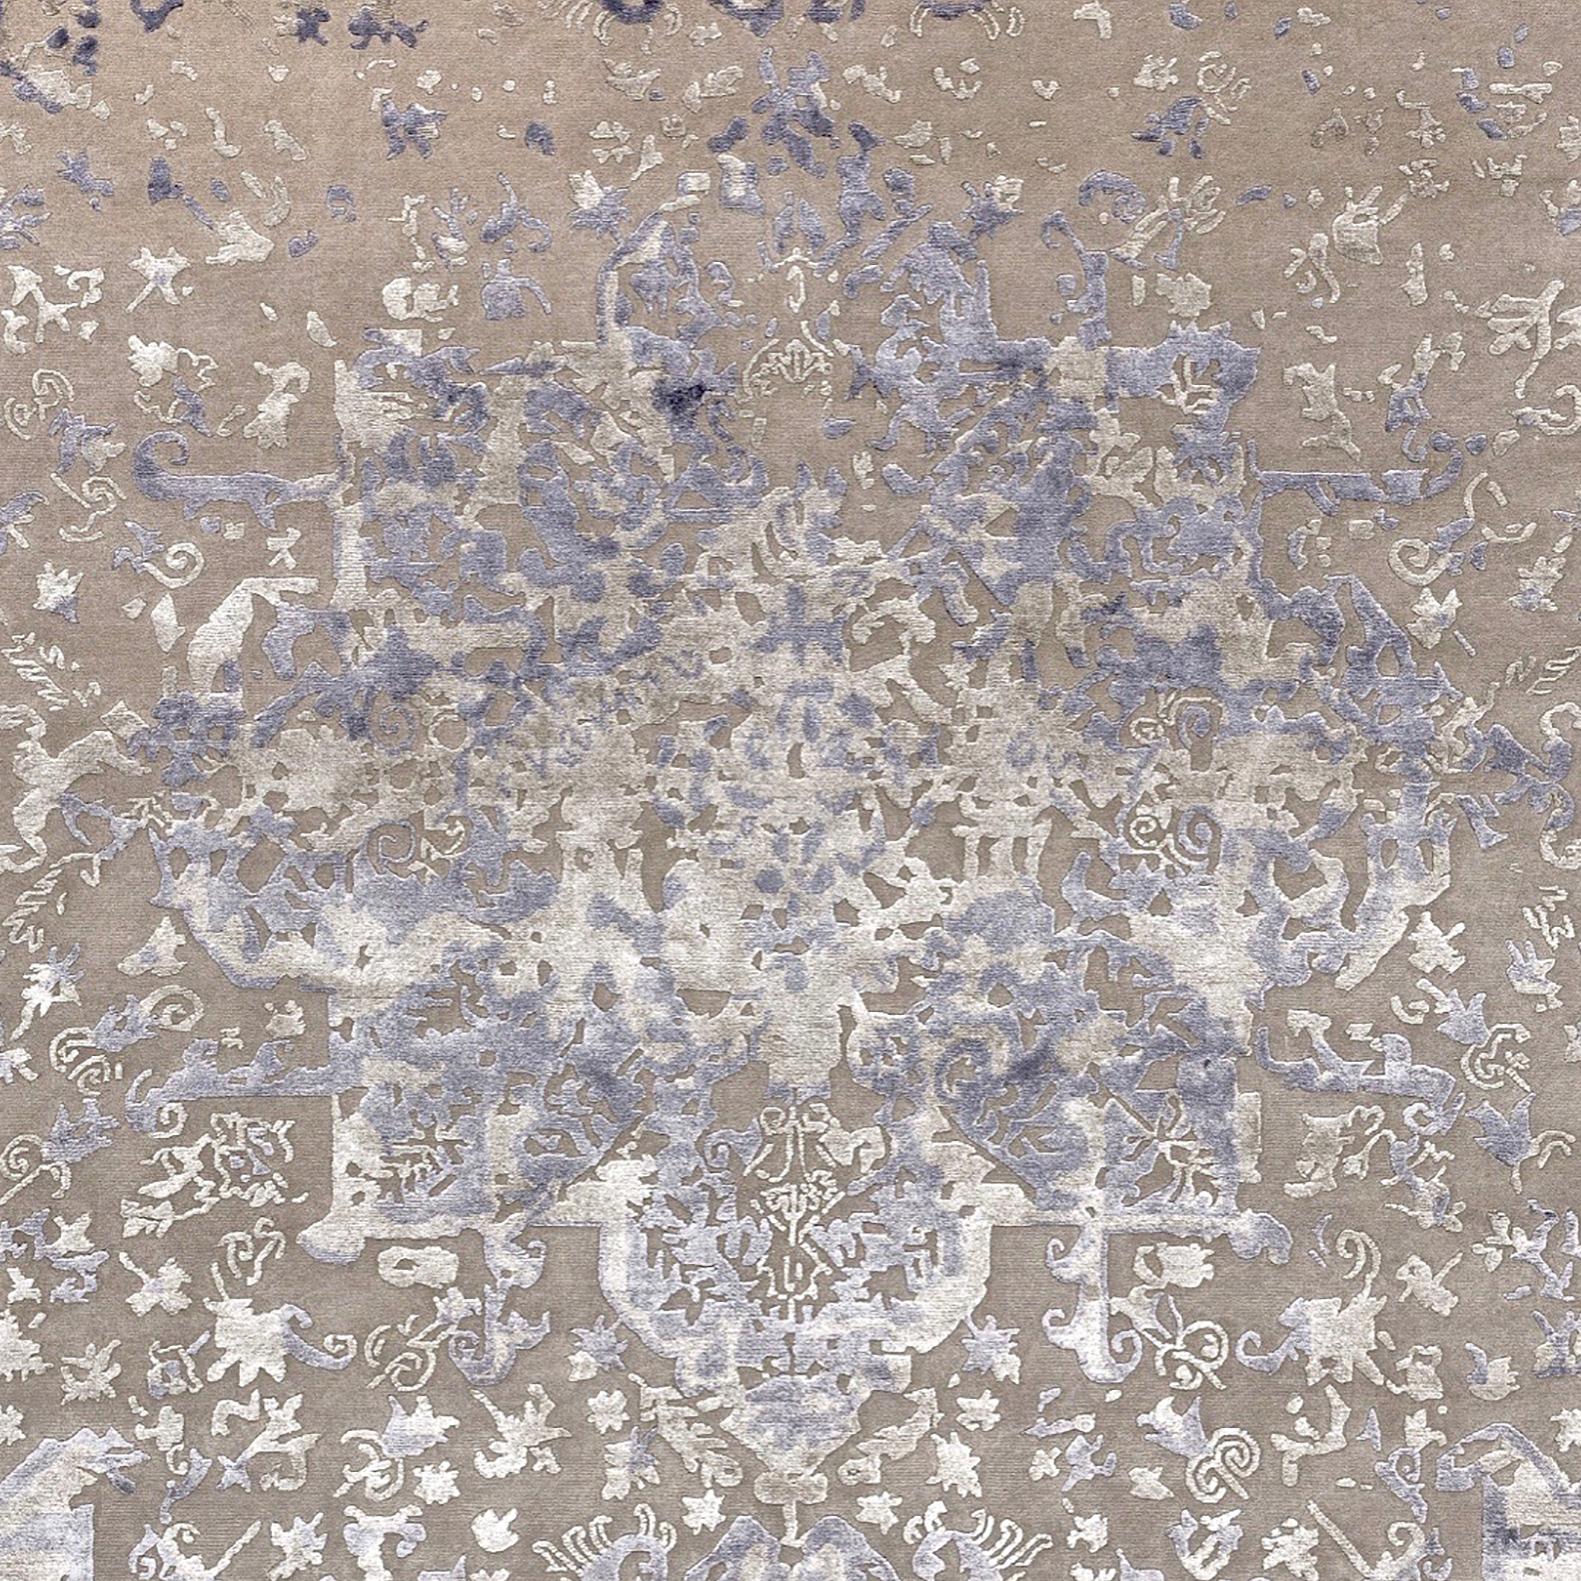 Inspired by the ancient Persian civilization, famous all over the world for its textile tradition, Persepoli is an elegant model with rich details. Its oriental echo is embellished with a delicate vintage effect that gives the rug the same allure as